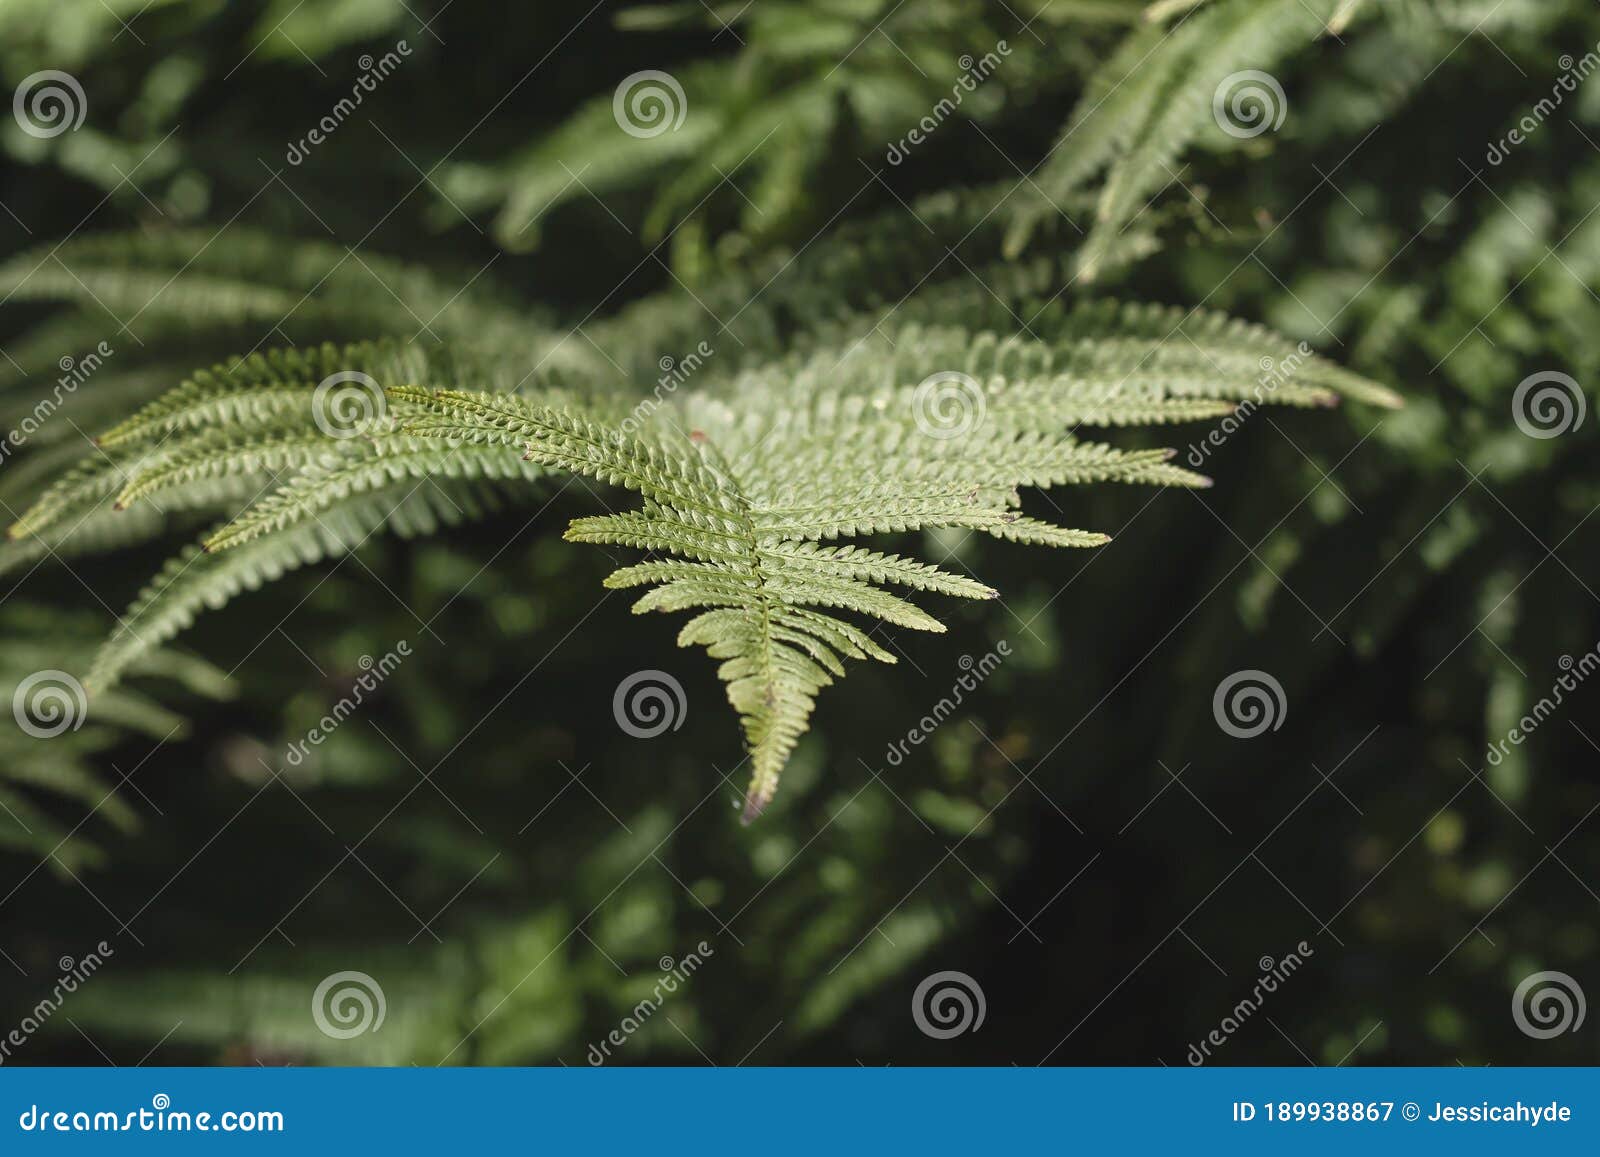 lady fern green fronds close up